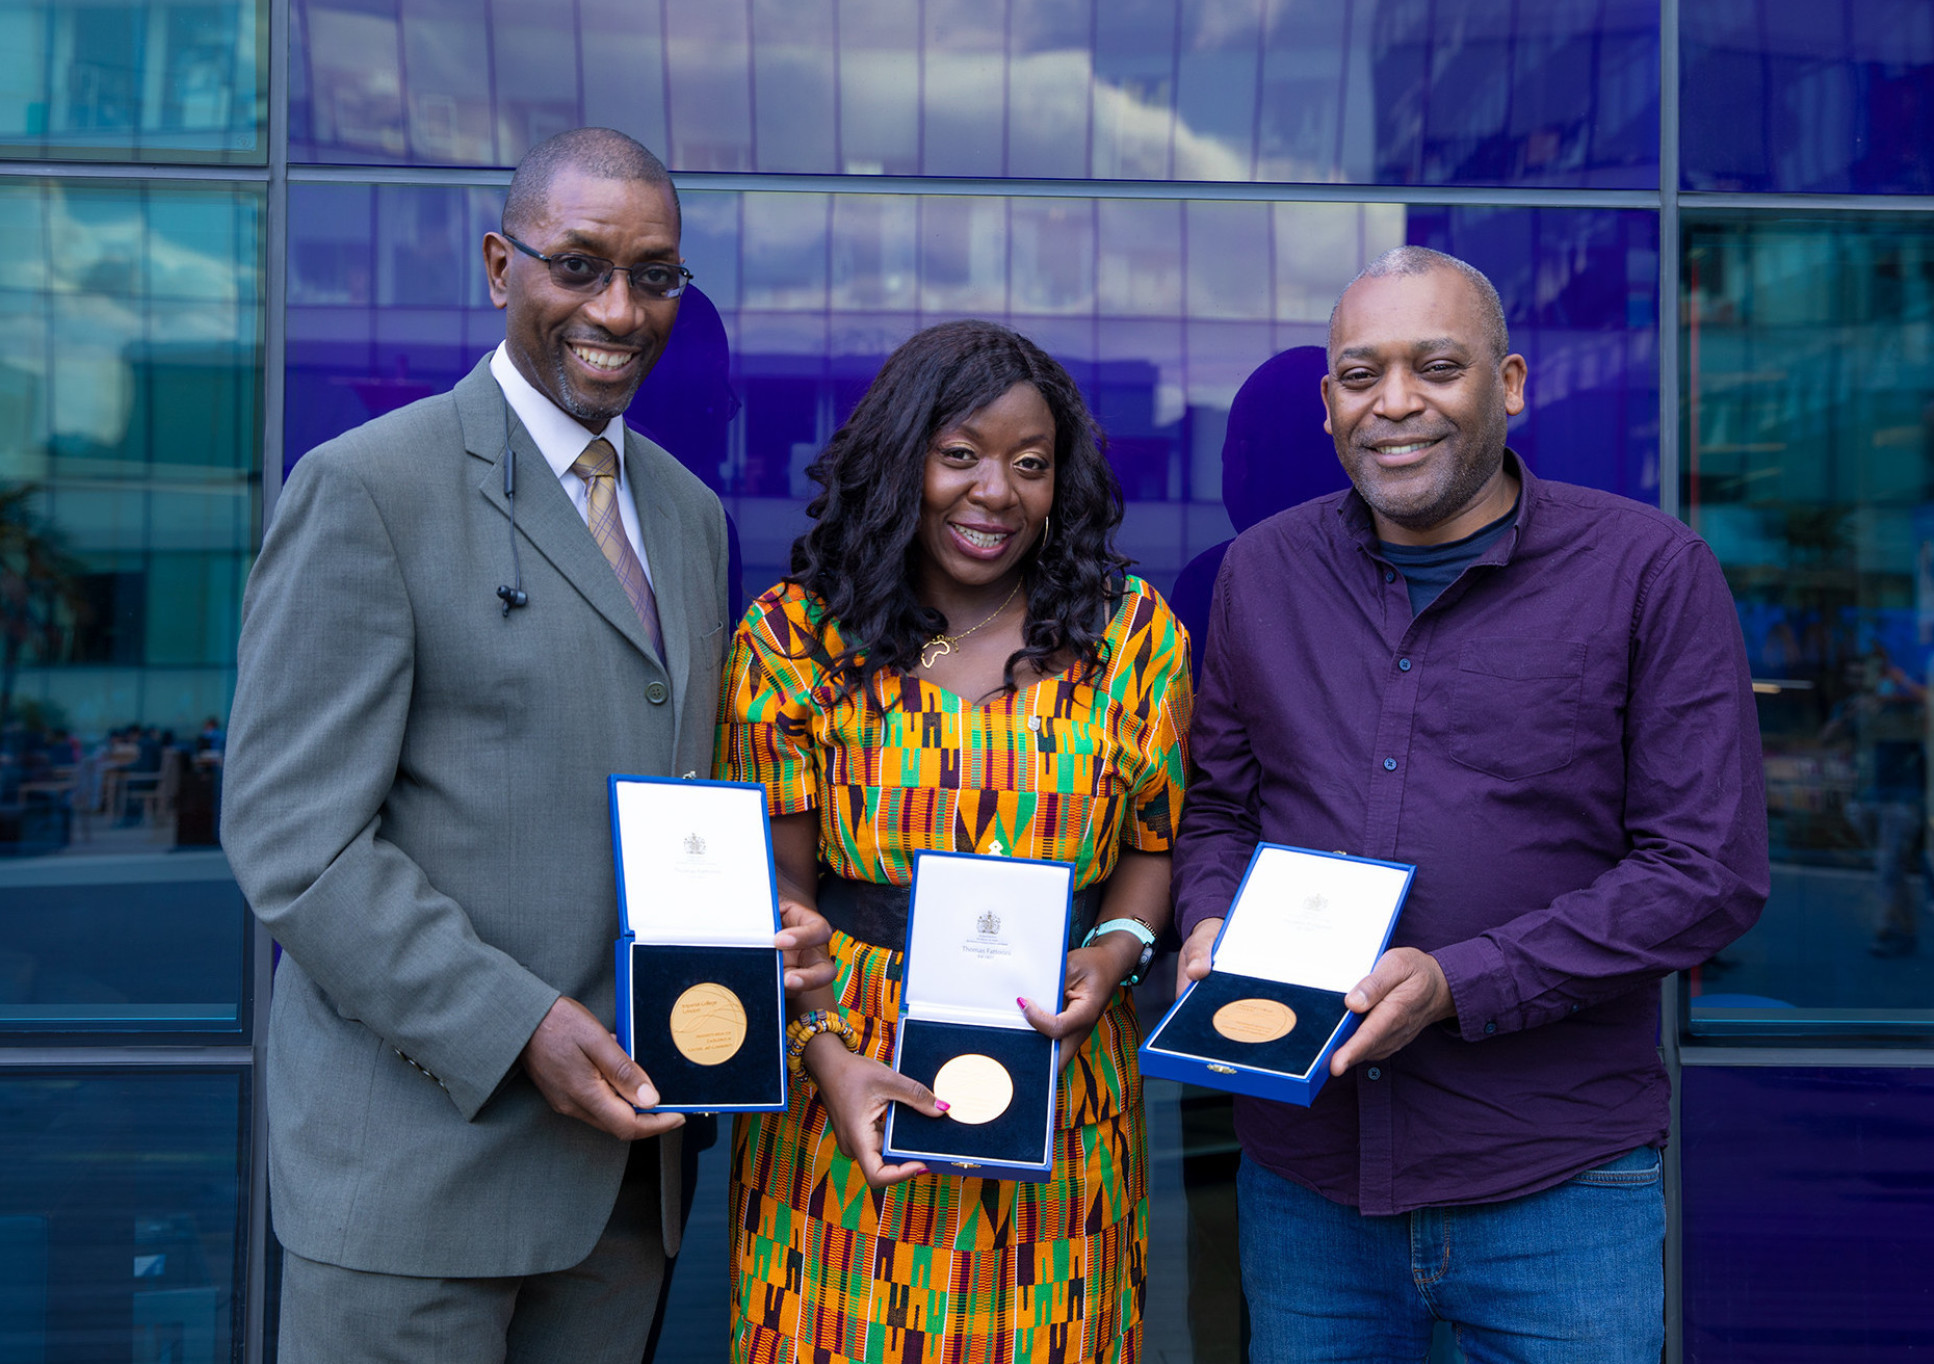 Imperial As One co-Chairs with their President's Medals for Excellence in Culture and Community